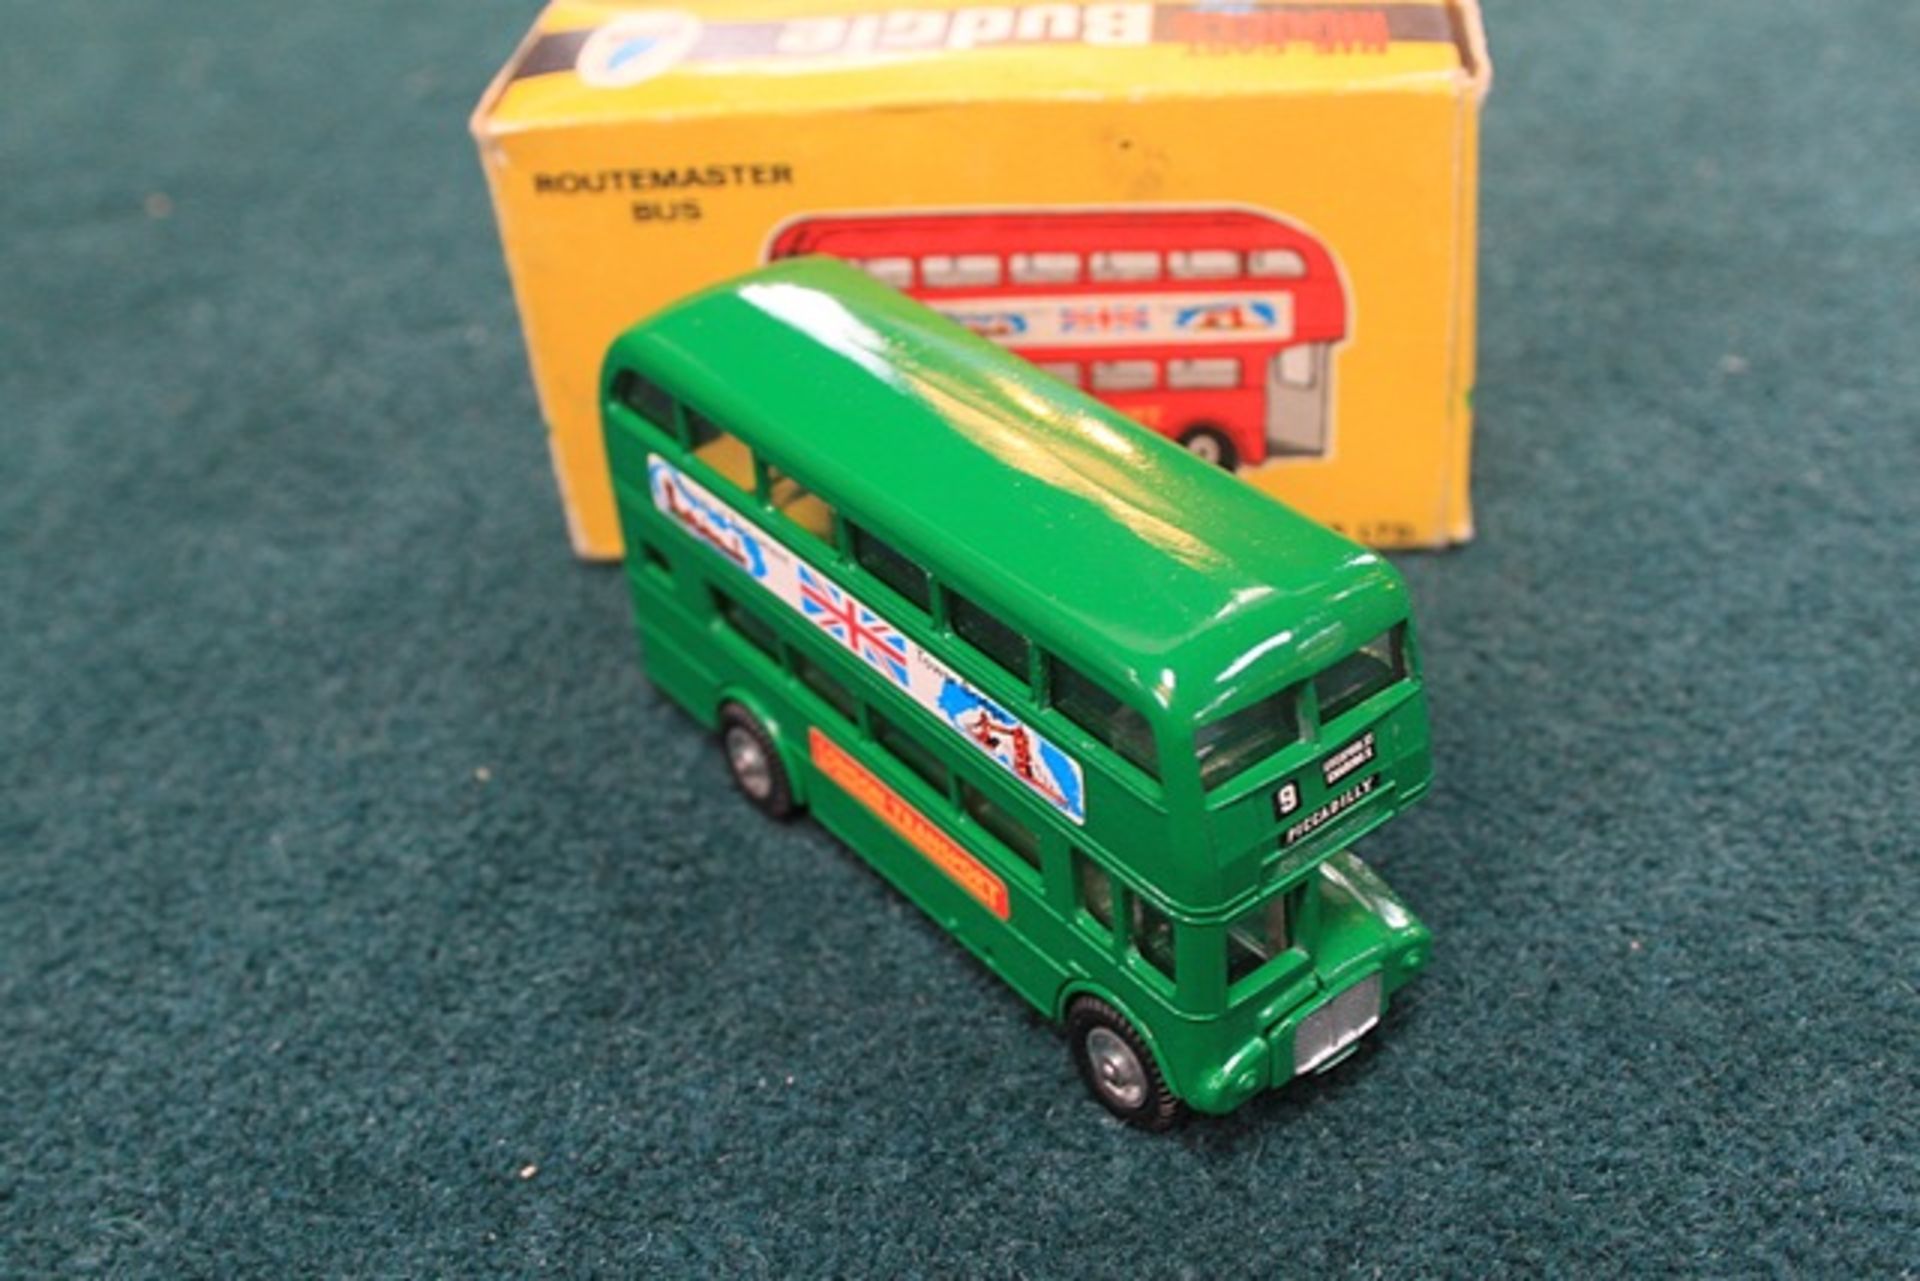 Budgie Diecast # 236 Route Master Bus Complete With Box